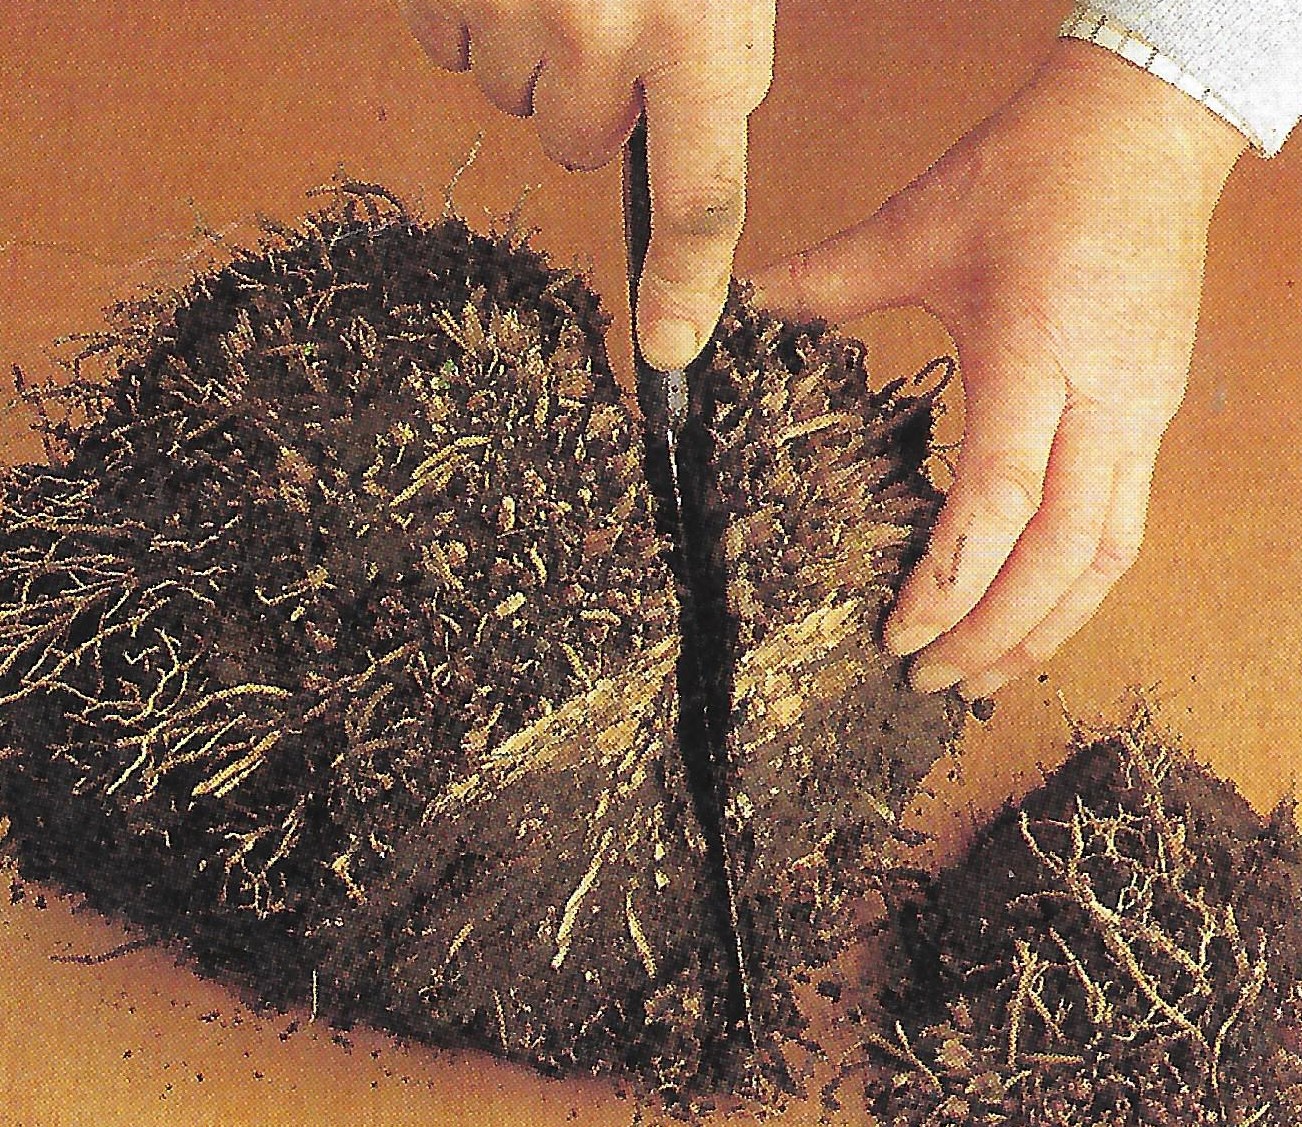 Step 4: Plants with thick, fleshy root like hostas are best sawn into pieces.